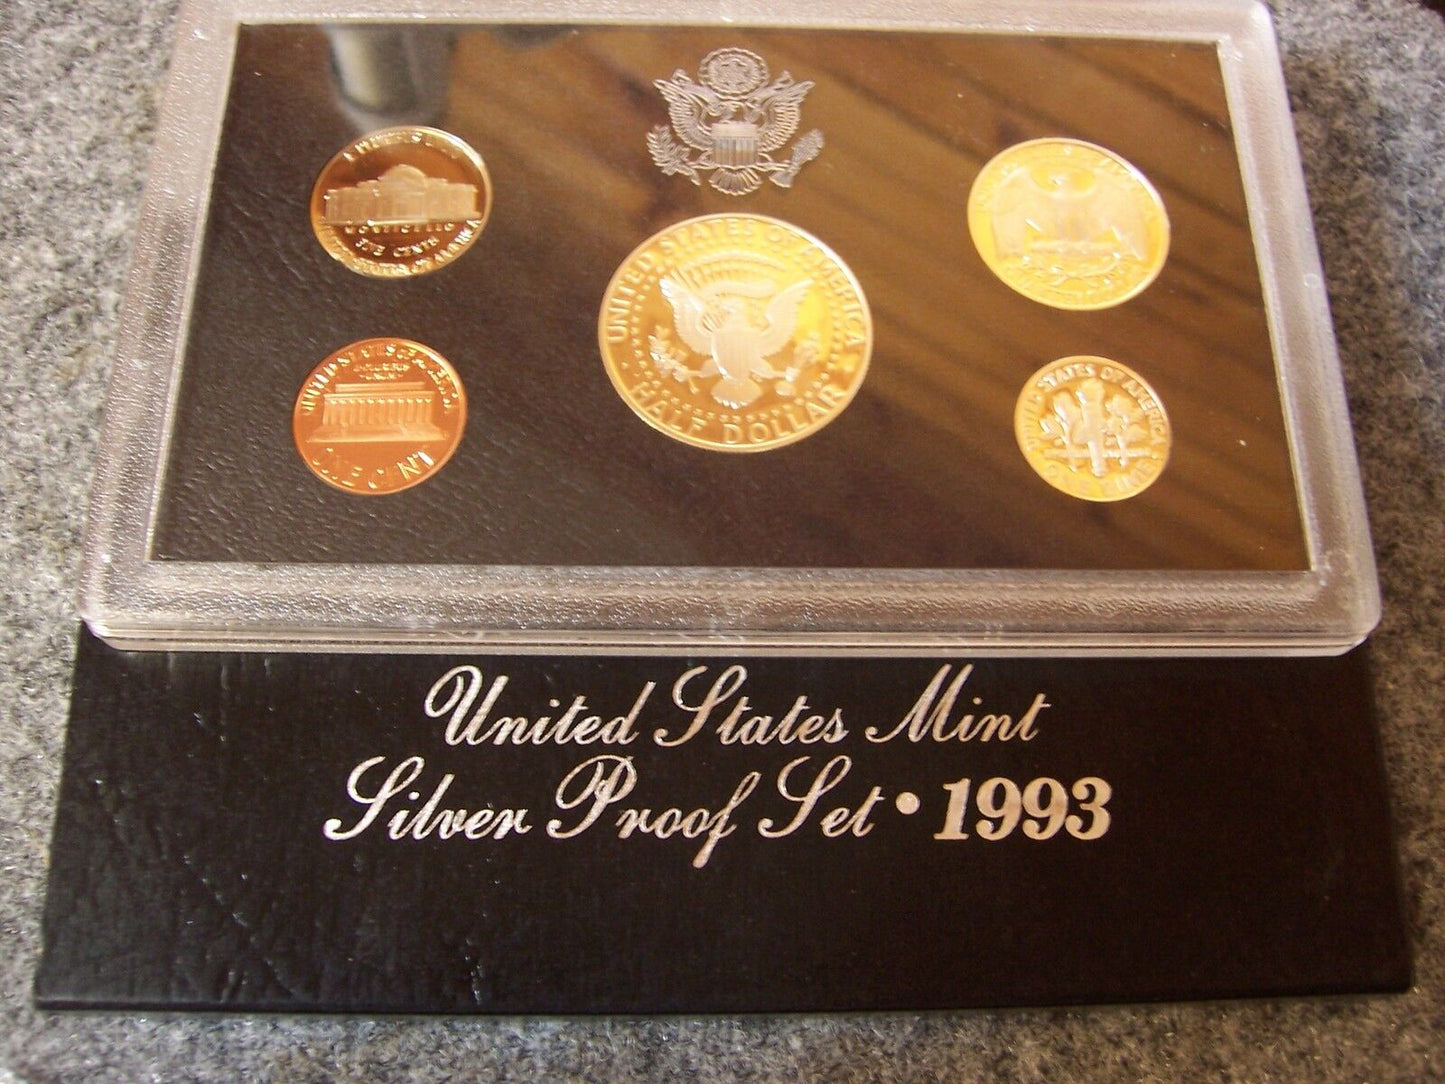 1993 S United States Mint Silver Proof Set